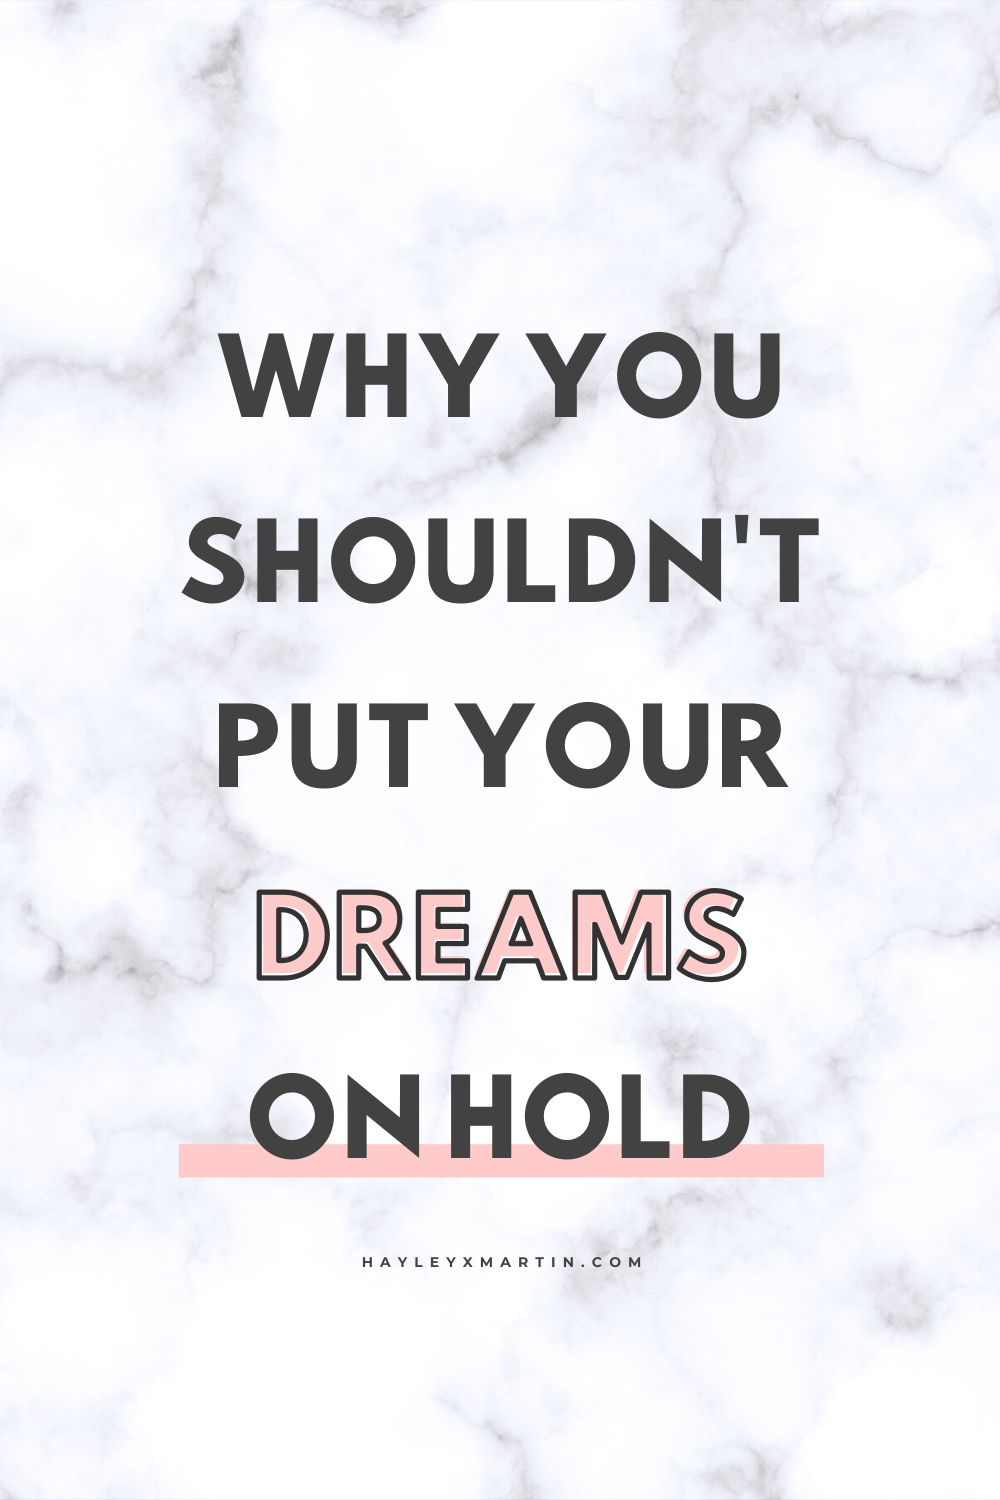 WHY YOU SHOULDN'T PUT YOUR DREAMS ON HOLD | HAYLEYXMARTIN